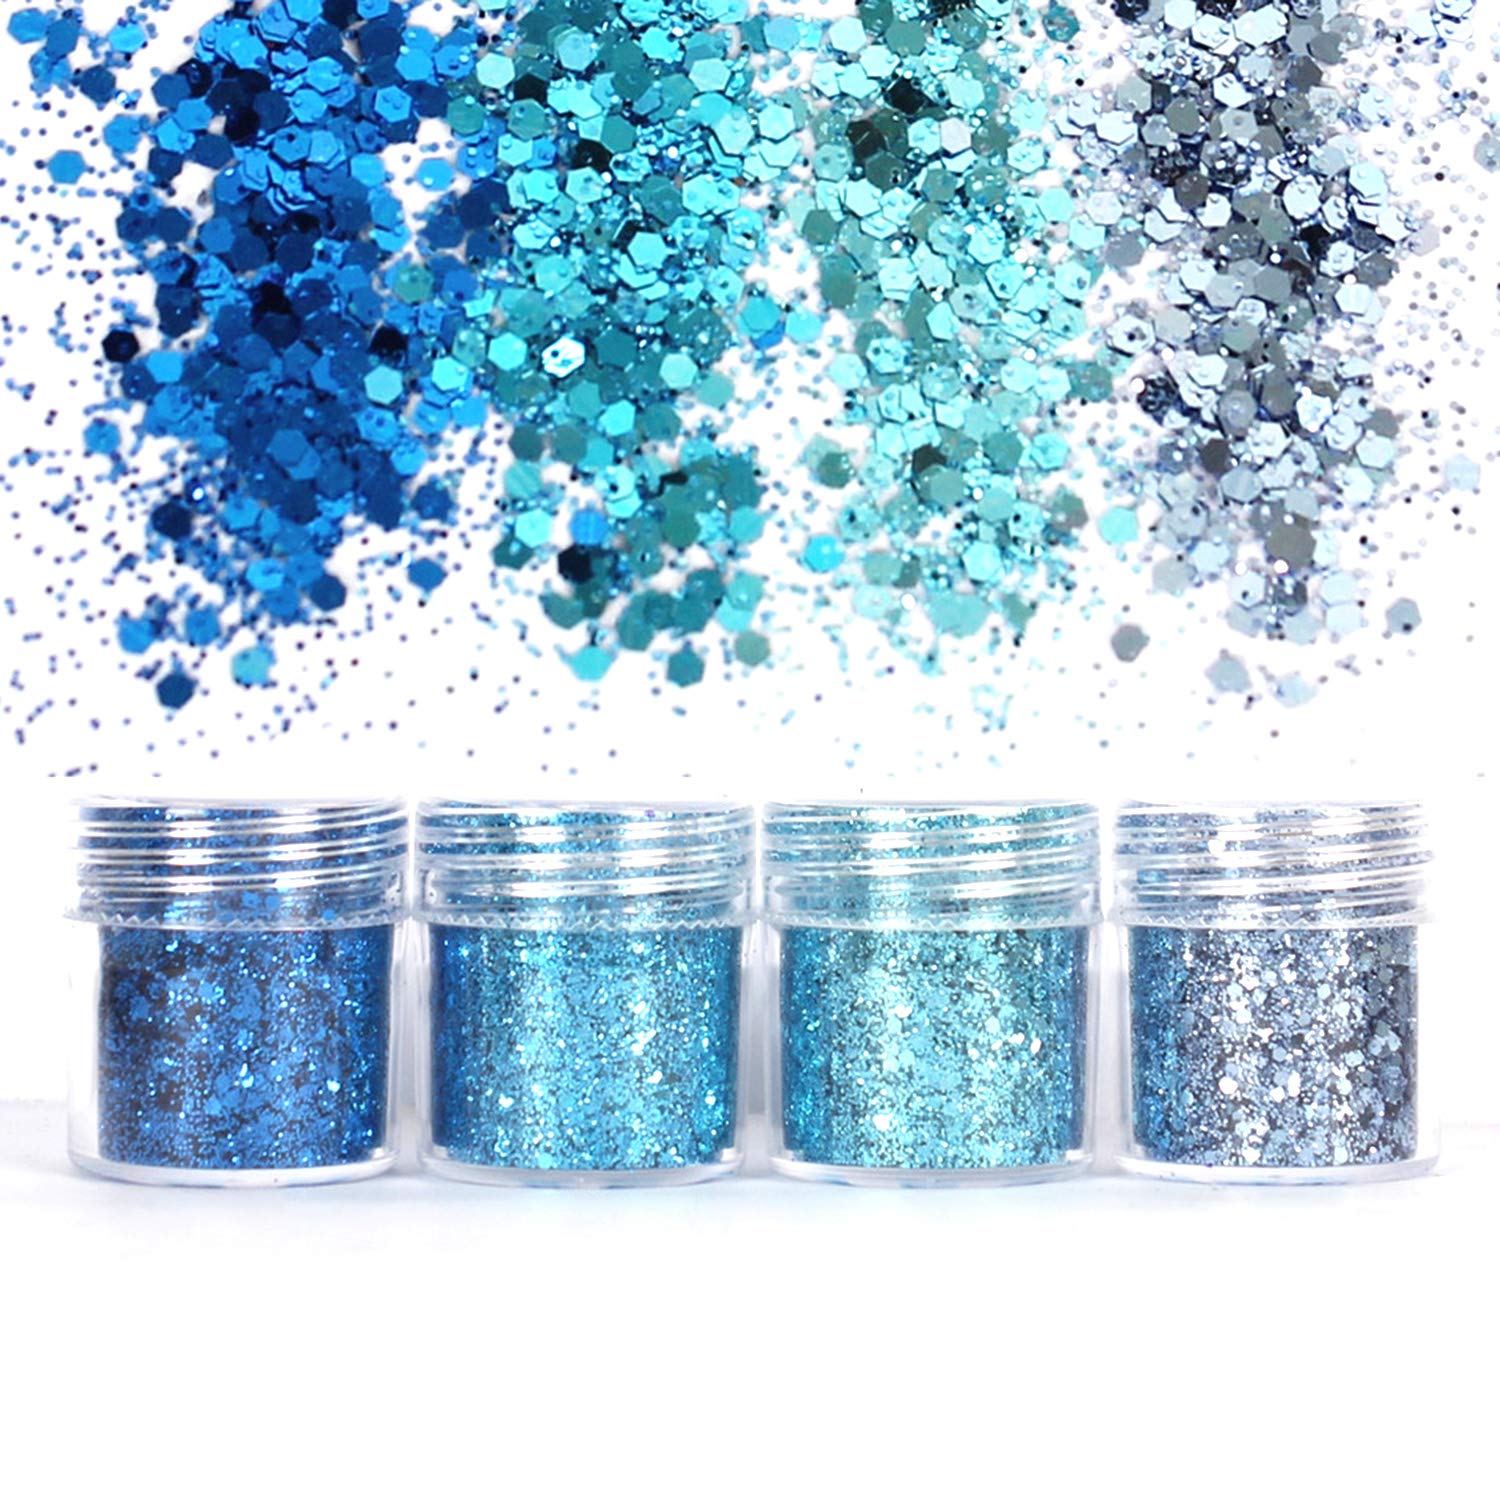 Unime Body Glitter 16 Colors Chunky Glitter for Body Face Hair Make Up Nail Art Mixed Color Glitter